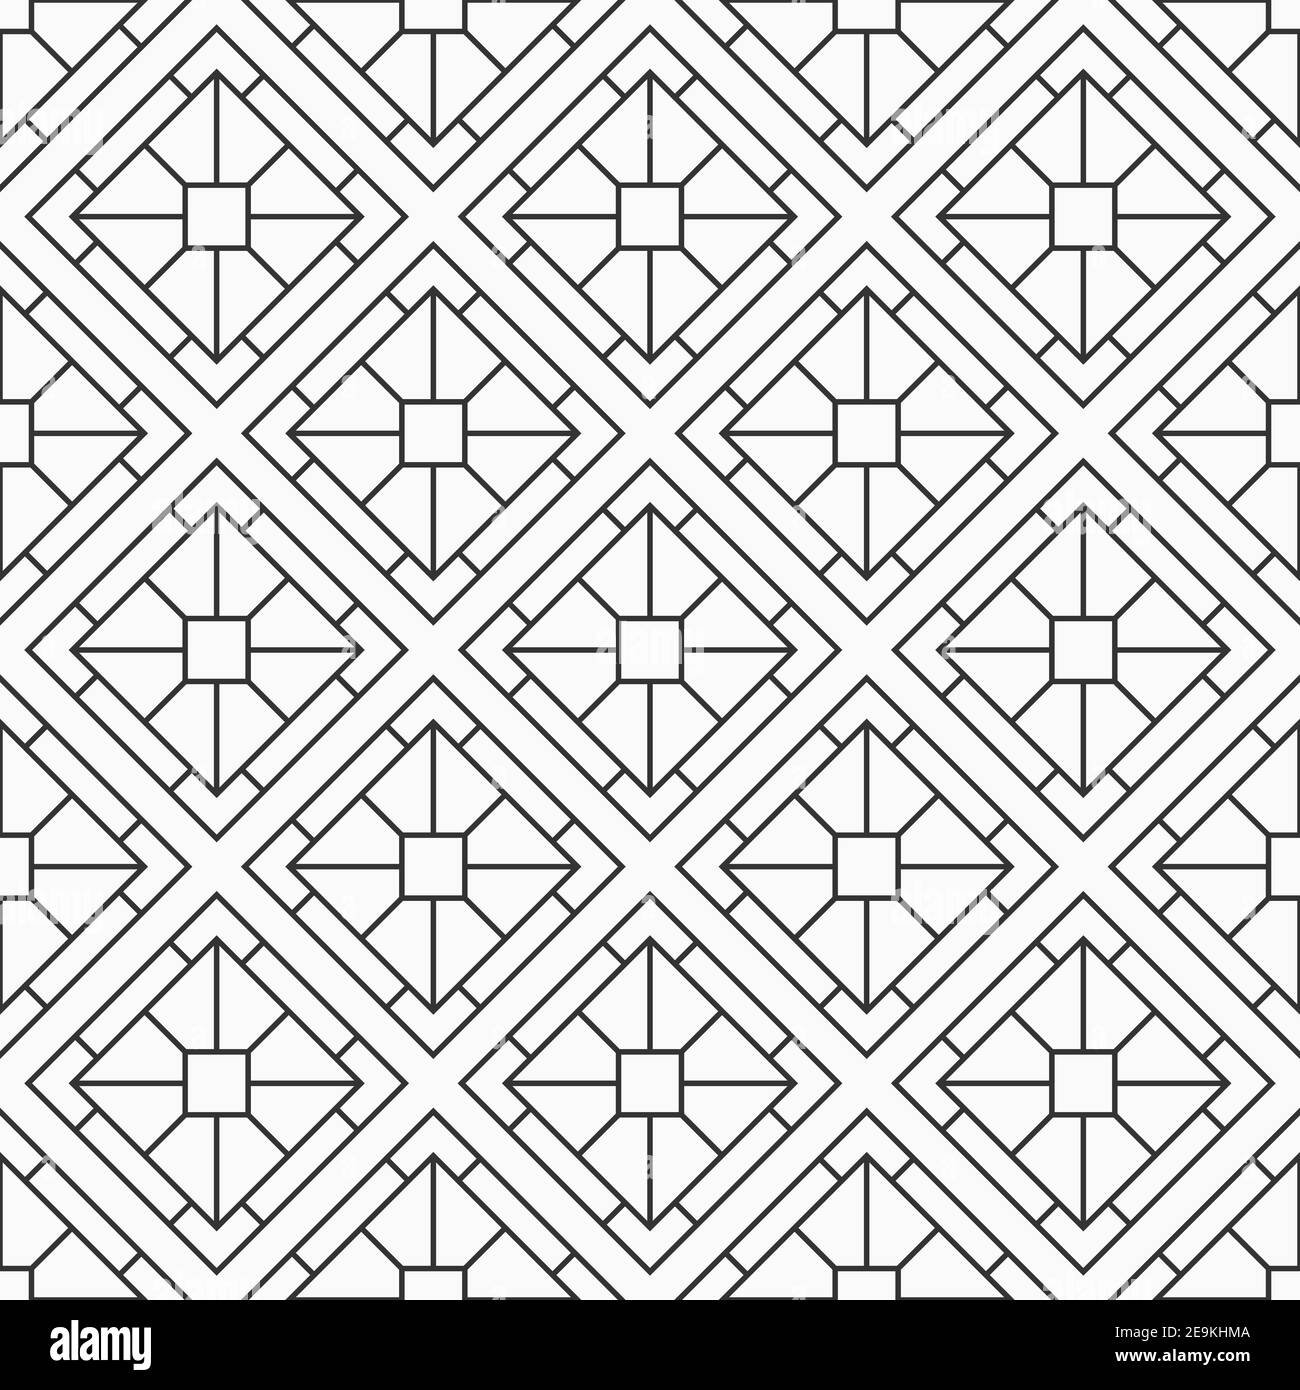 Abstract seamless rhombuses pattern. Modern stylish texture. Repeating geometric tiles. Vector monochrome background. Stock Vector